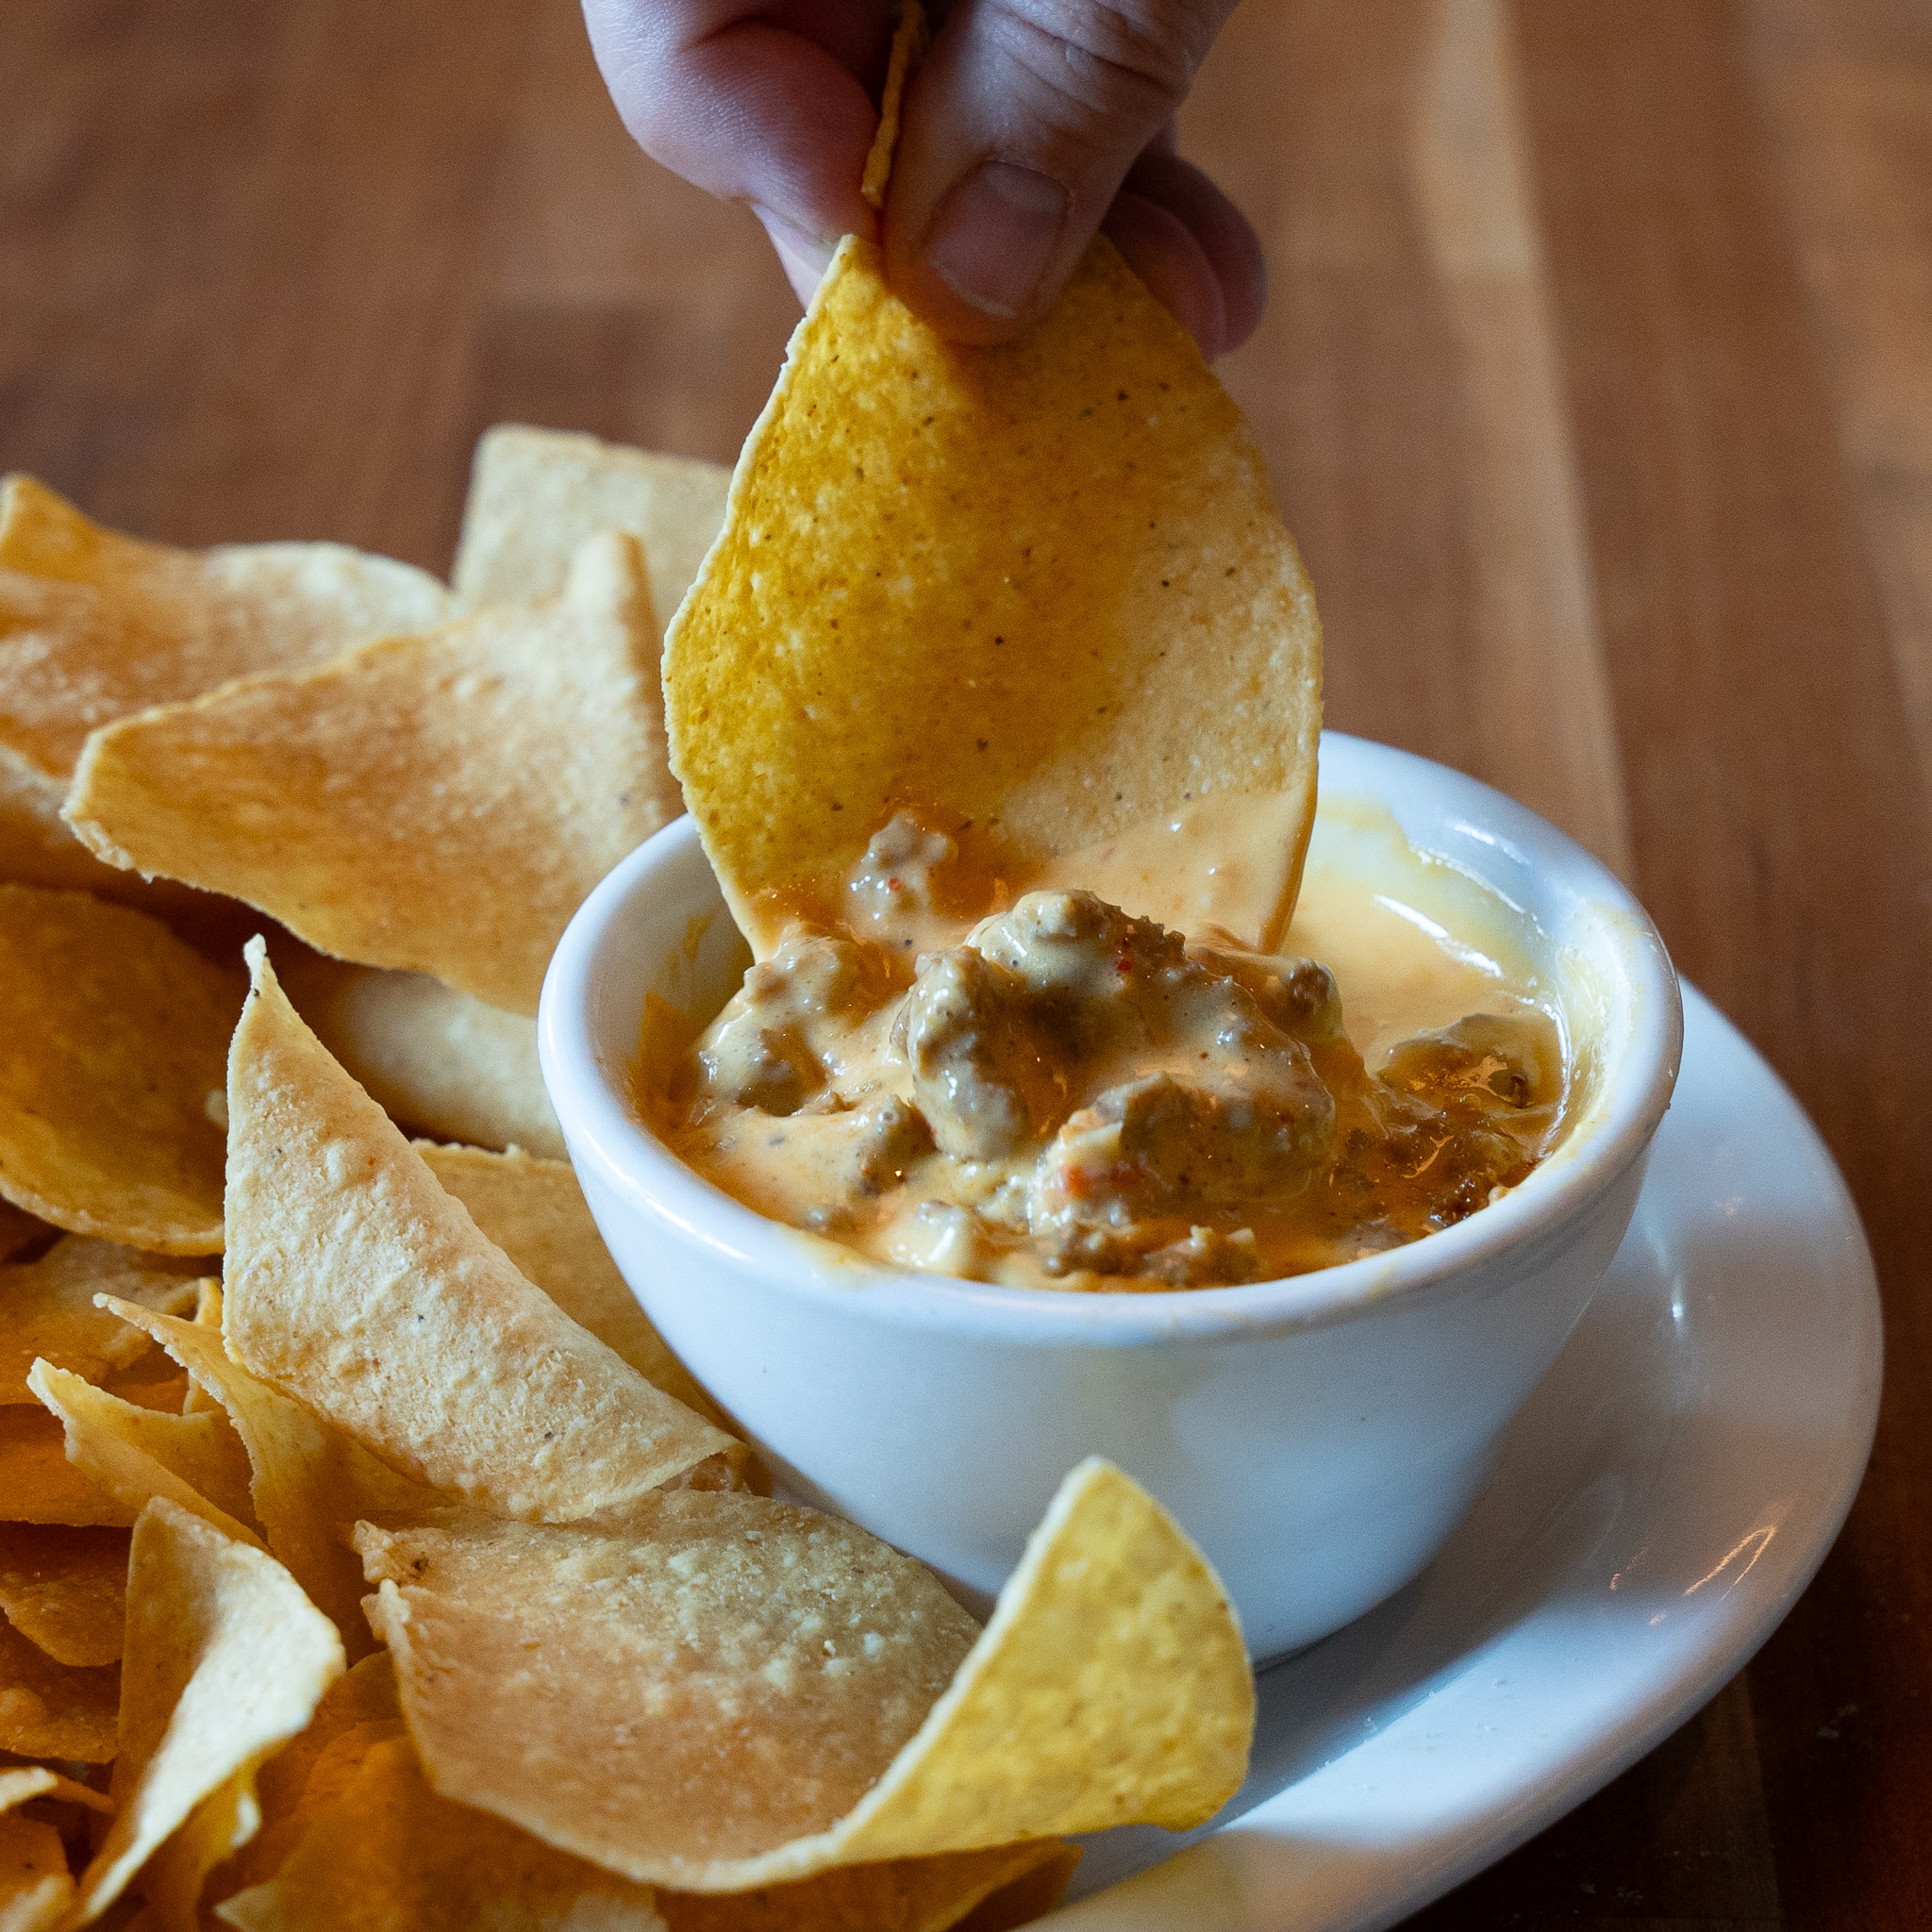 Cheddar's Scratch Kitchen chips and queso appetizer